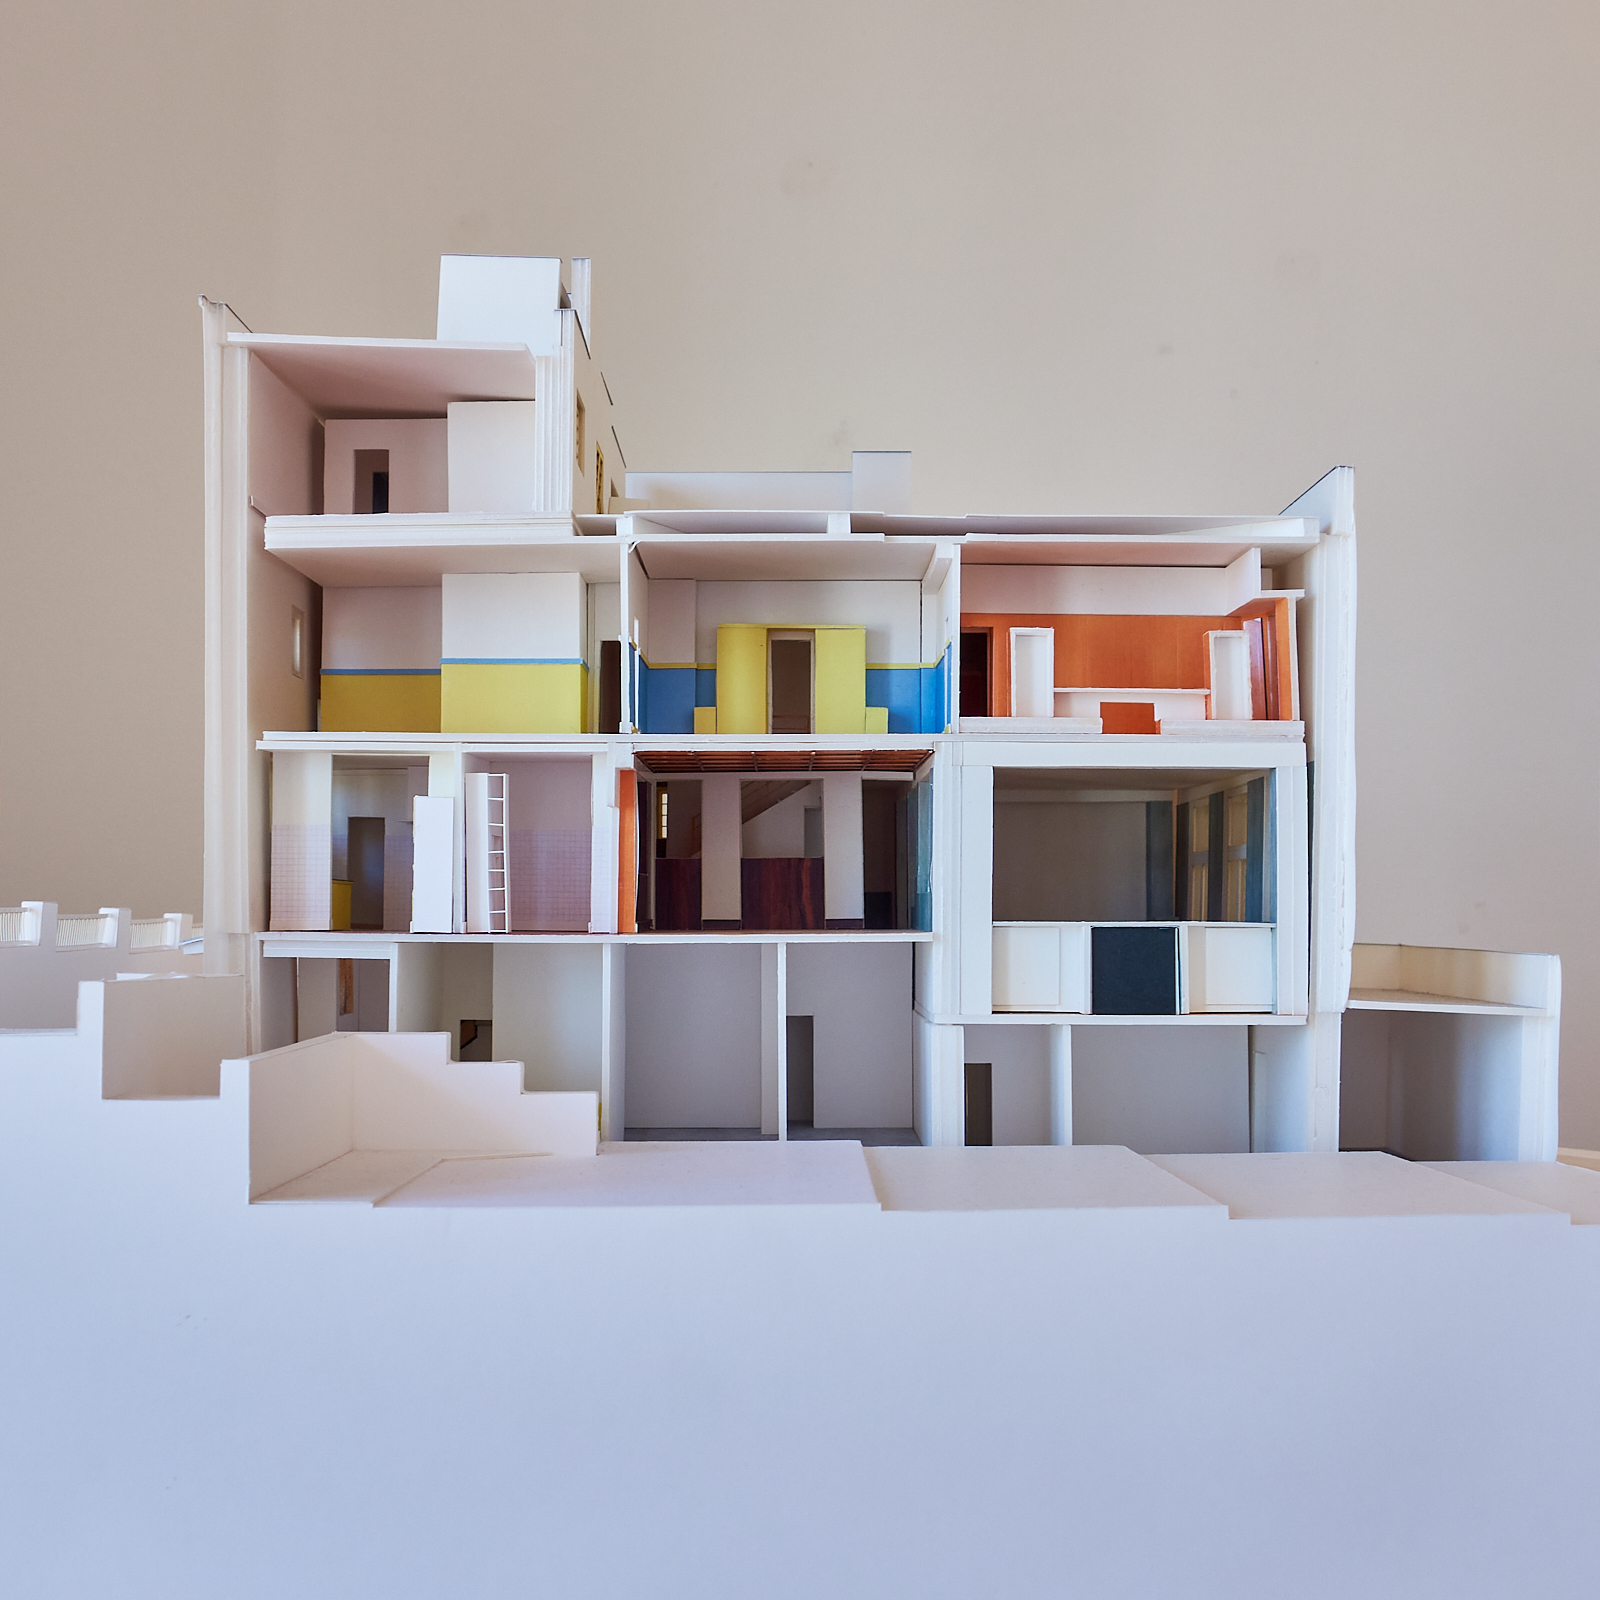 EXHIBITION: Architecture models of 9 iconic houses of Adolf Loos on the road to ‘Raumplan’.